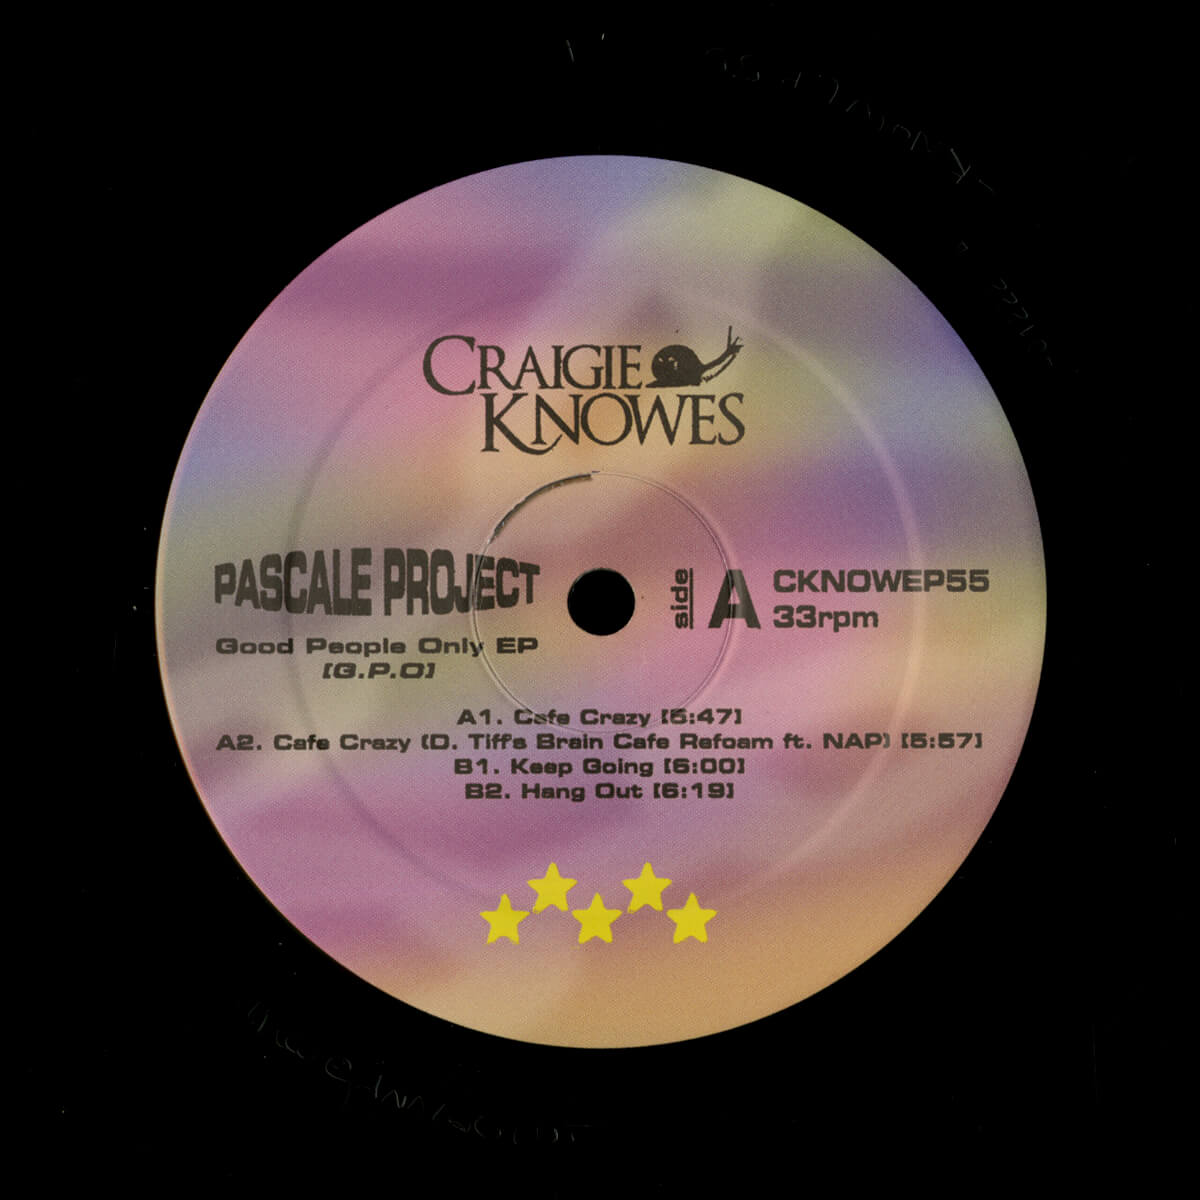 Pascale Project – Good People Only EP